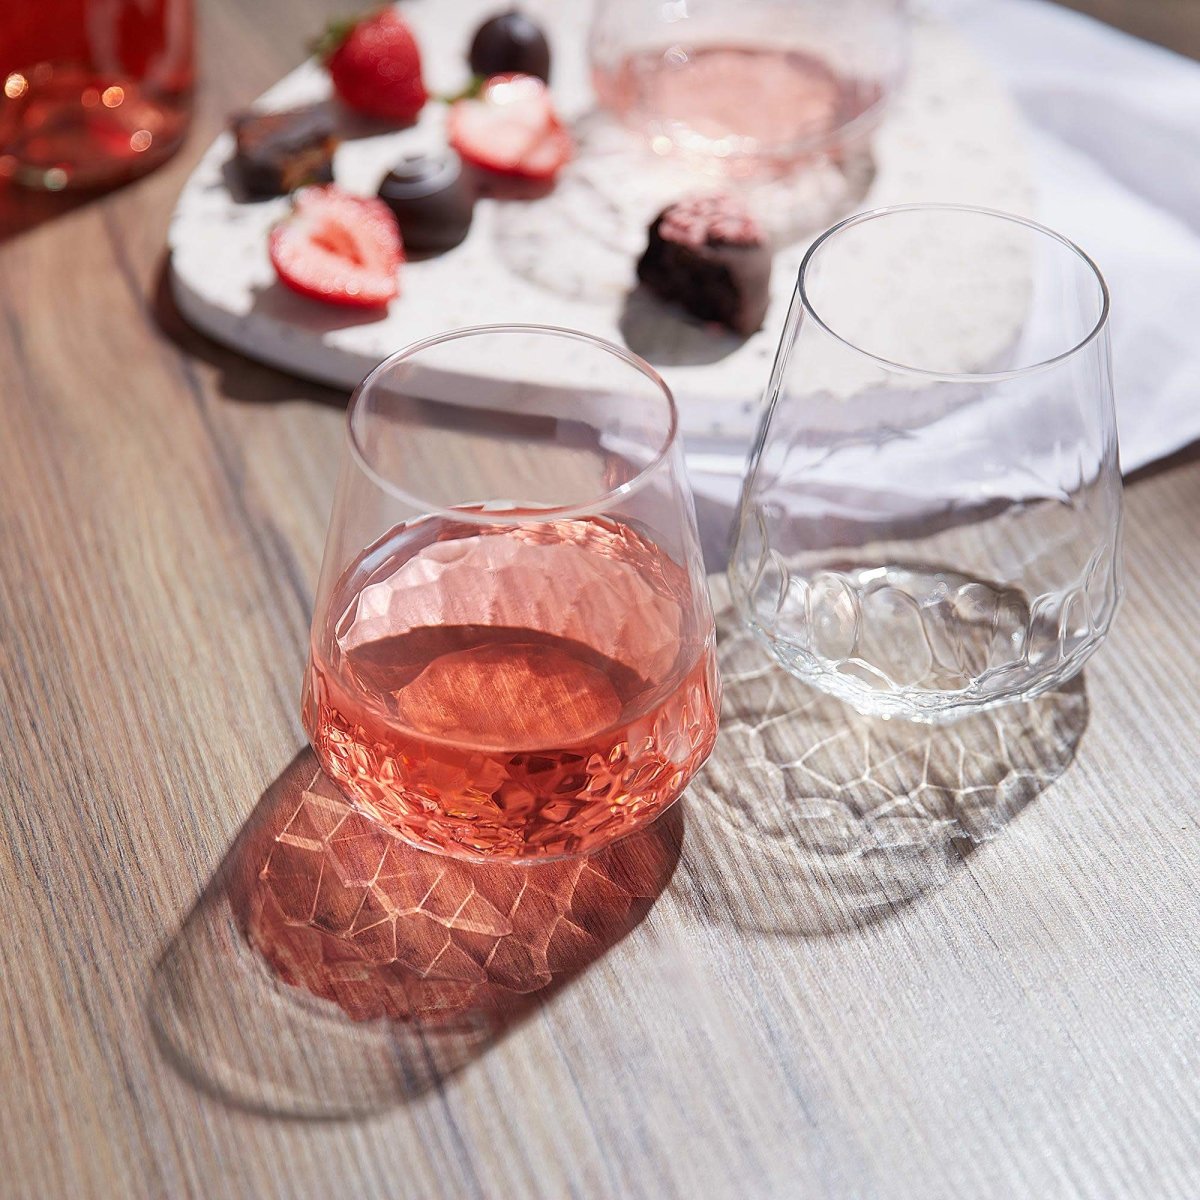 Lily's Home Unbreakable Stemmed Red Wine Glasses, Made of Non Breakable  Shatterproof Plastic, Indoor…See more Lily's Home Unbreakable Stemmed Red  Wine